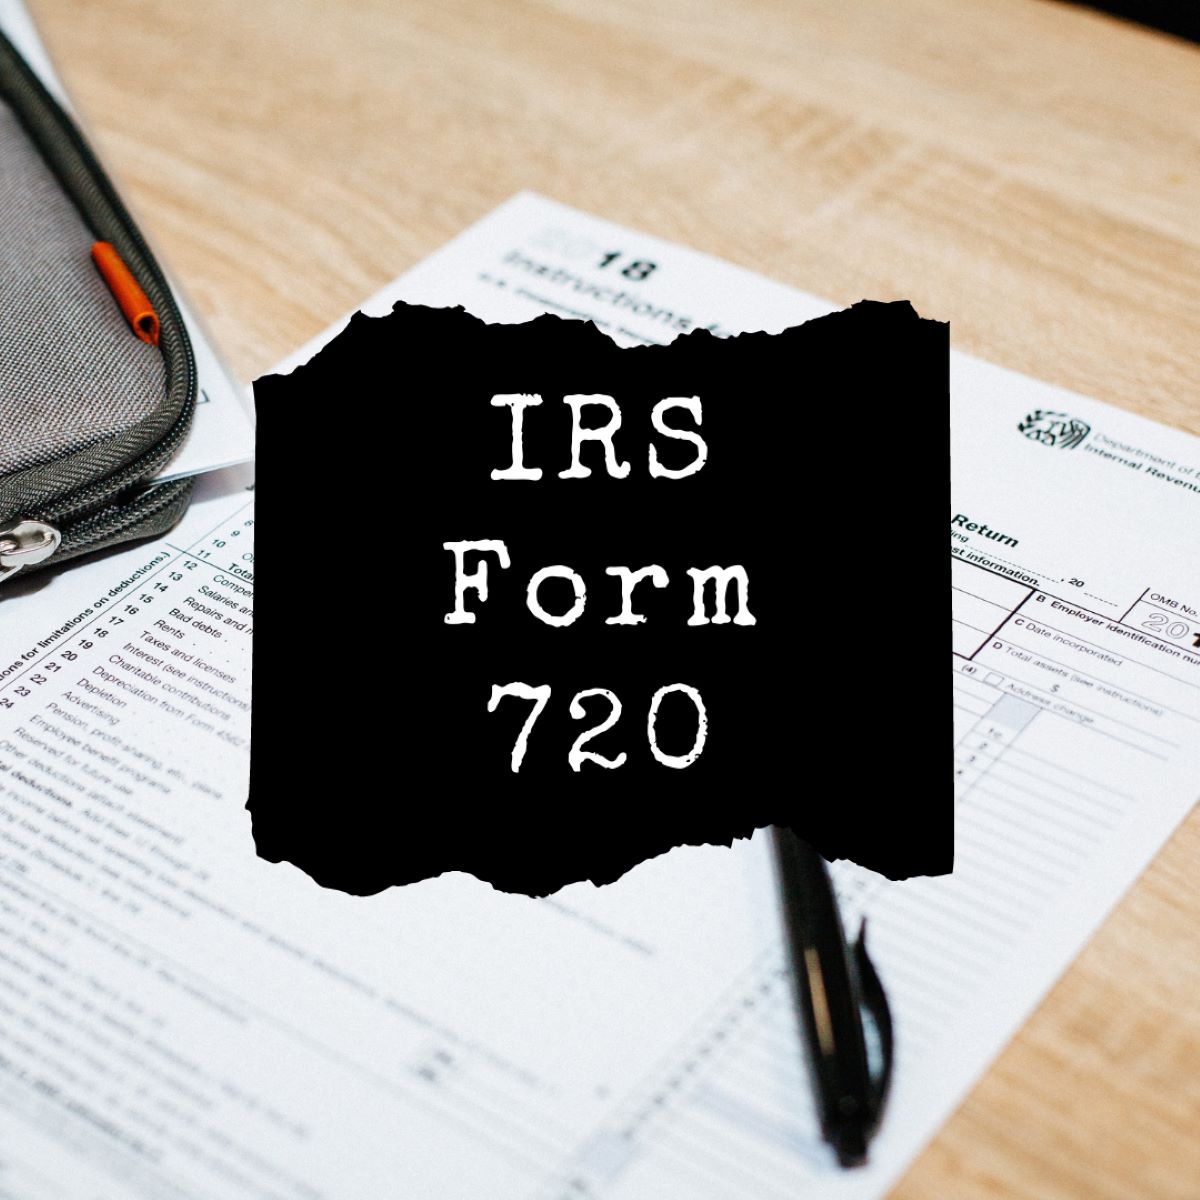 What Is IRS Form 720?